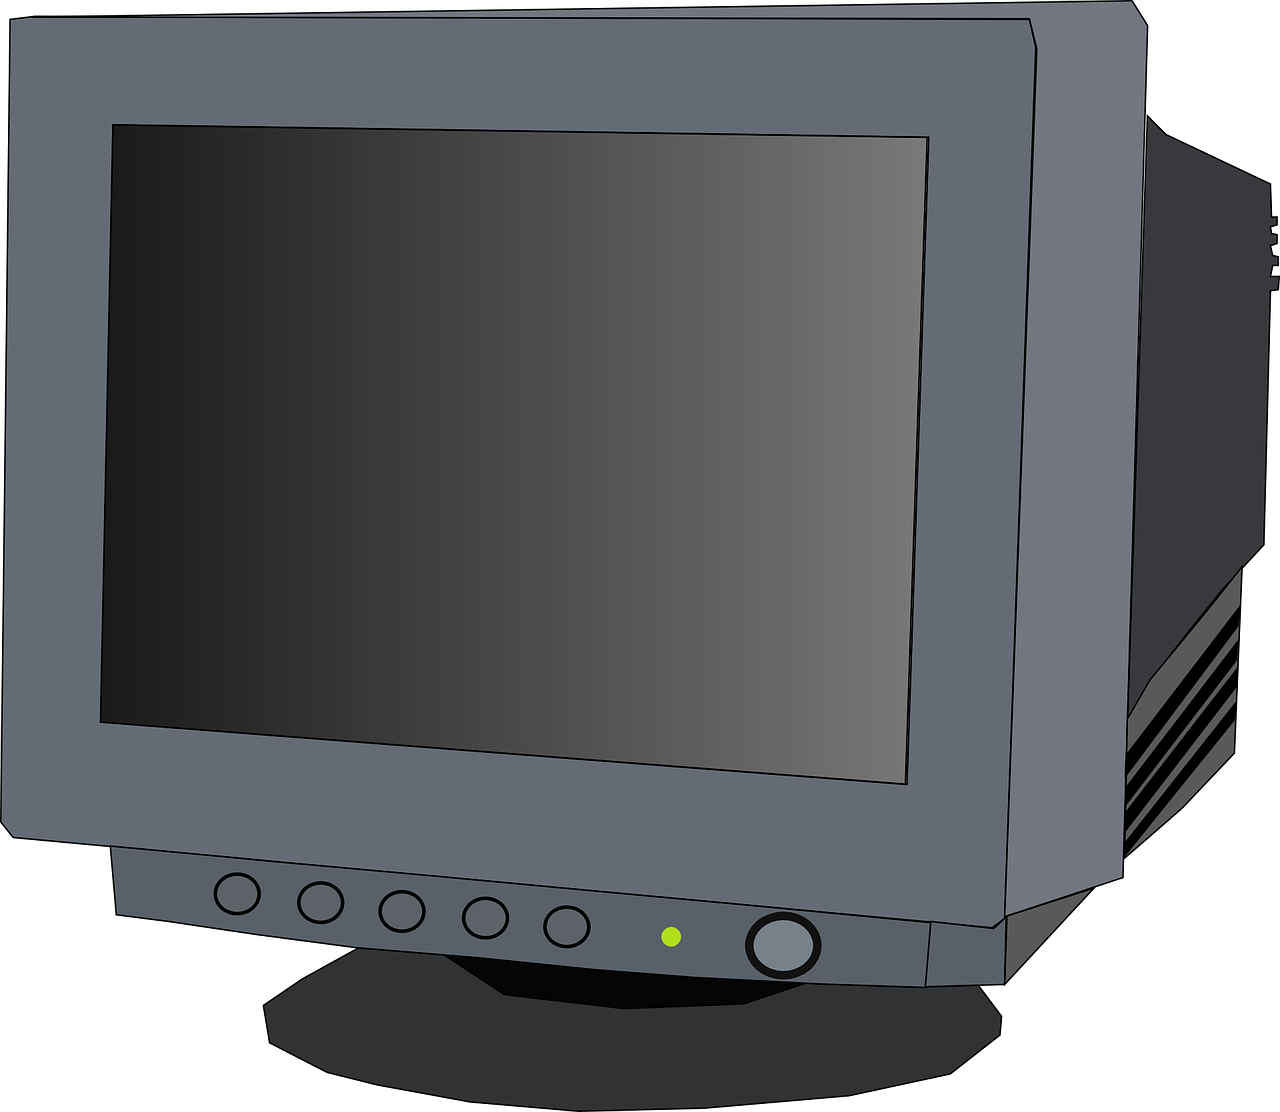 monitor,computer screen,crt,cathode ray tube,desktop,computer,screen,free vector graphics,free pictures, free photos, free images, royalty free, free illustrations, public domain